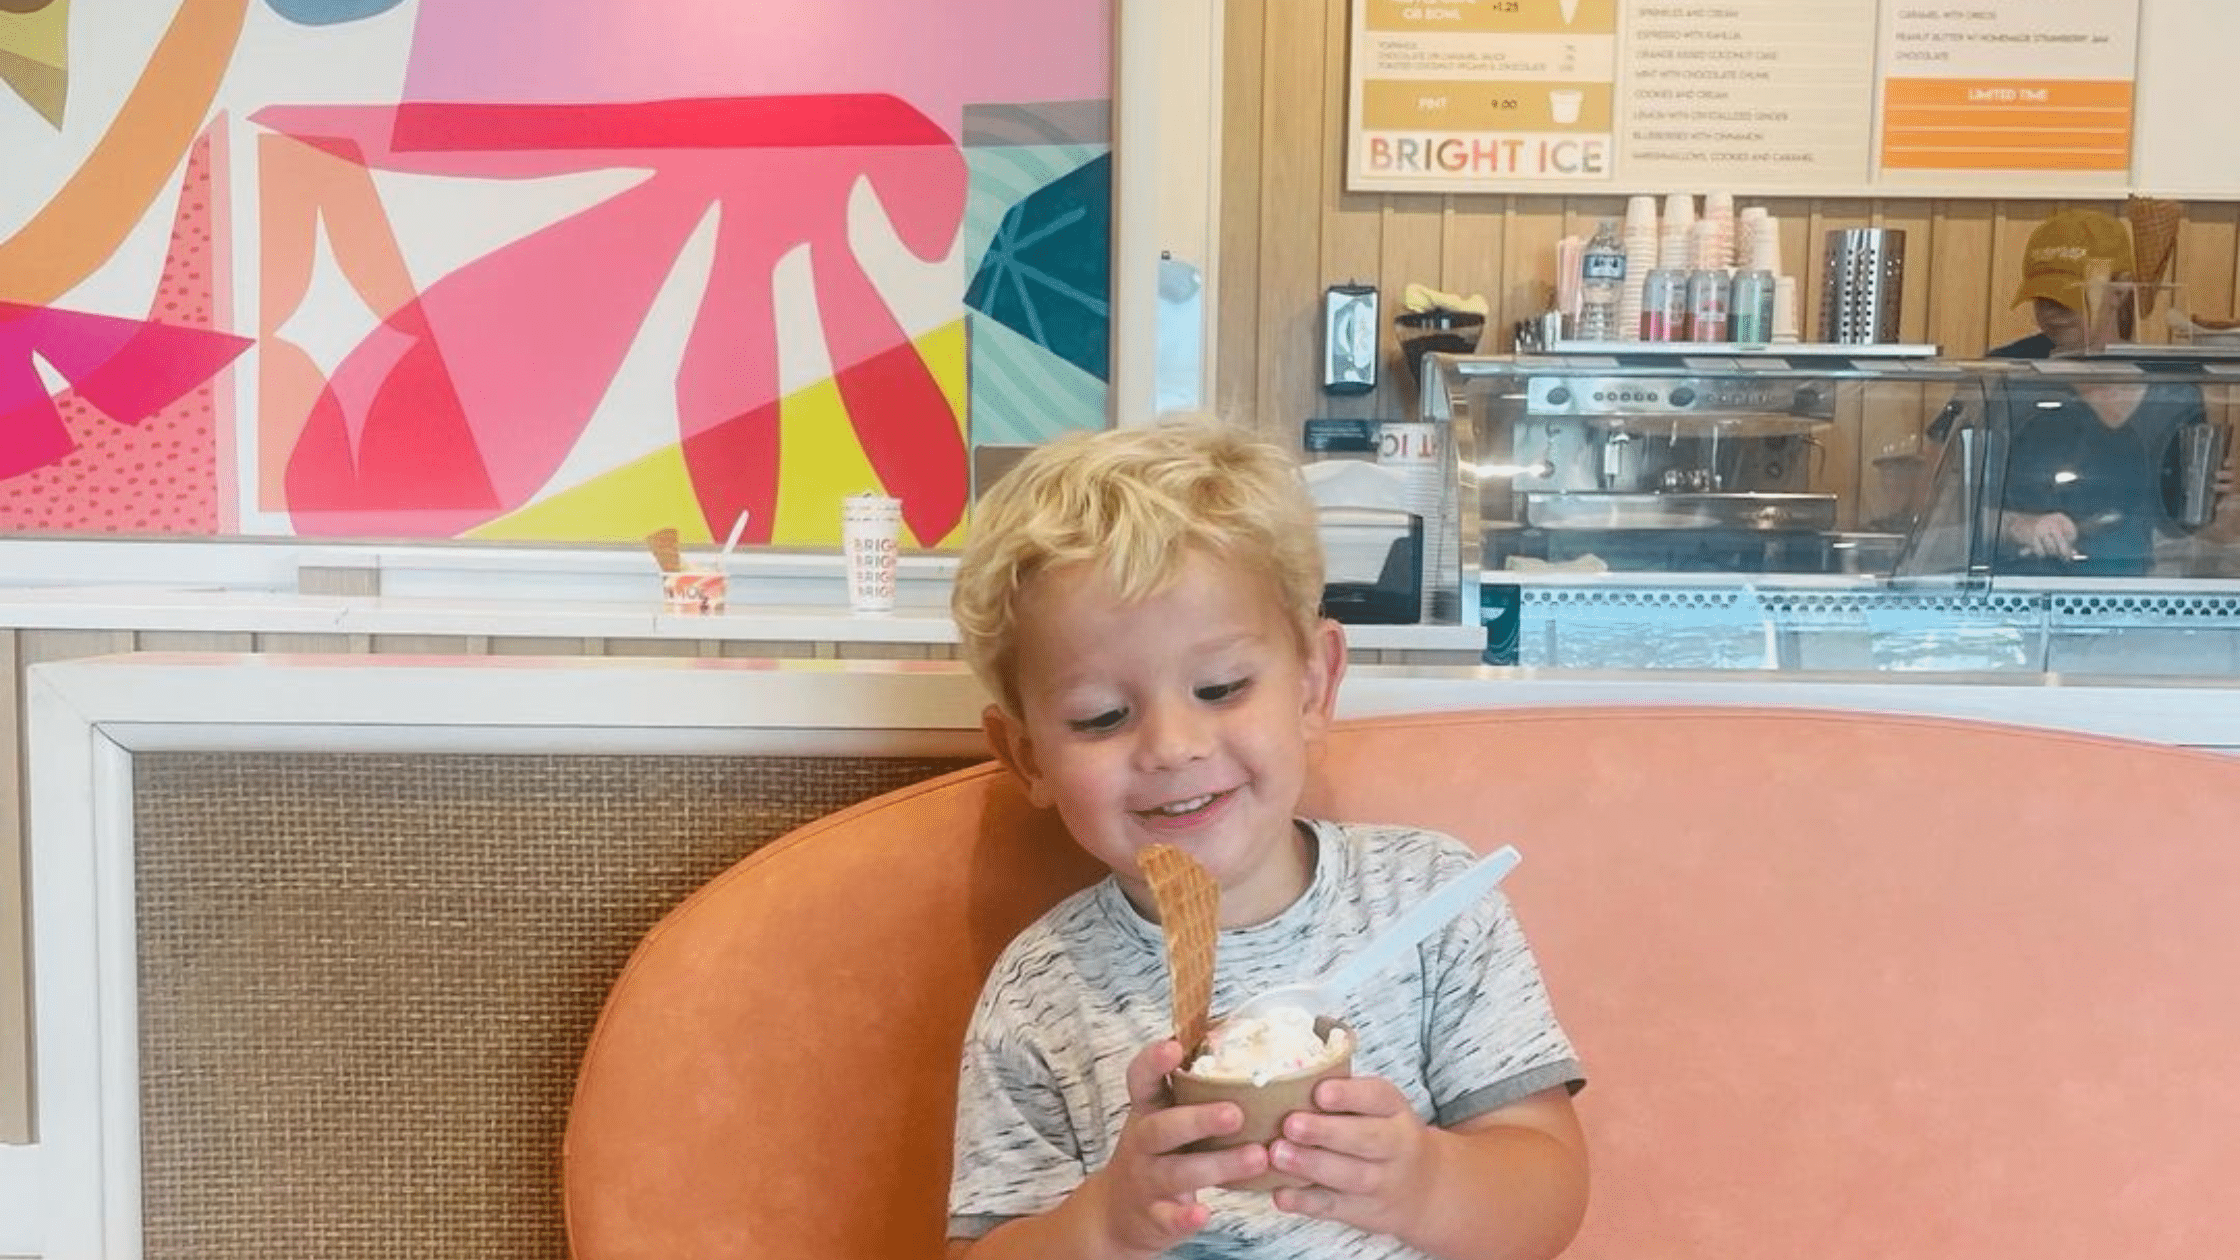 Child sitting on an orange couch smiling at the ice cream in their hand.